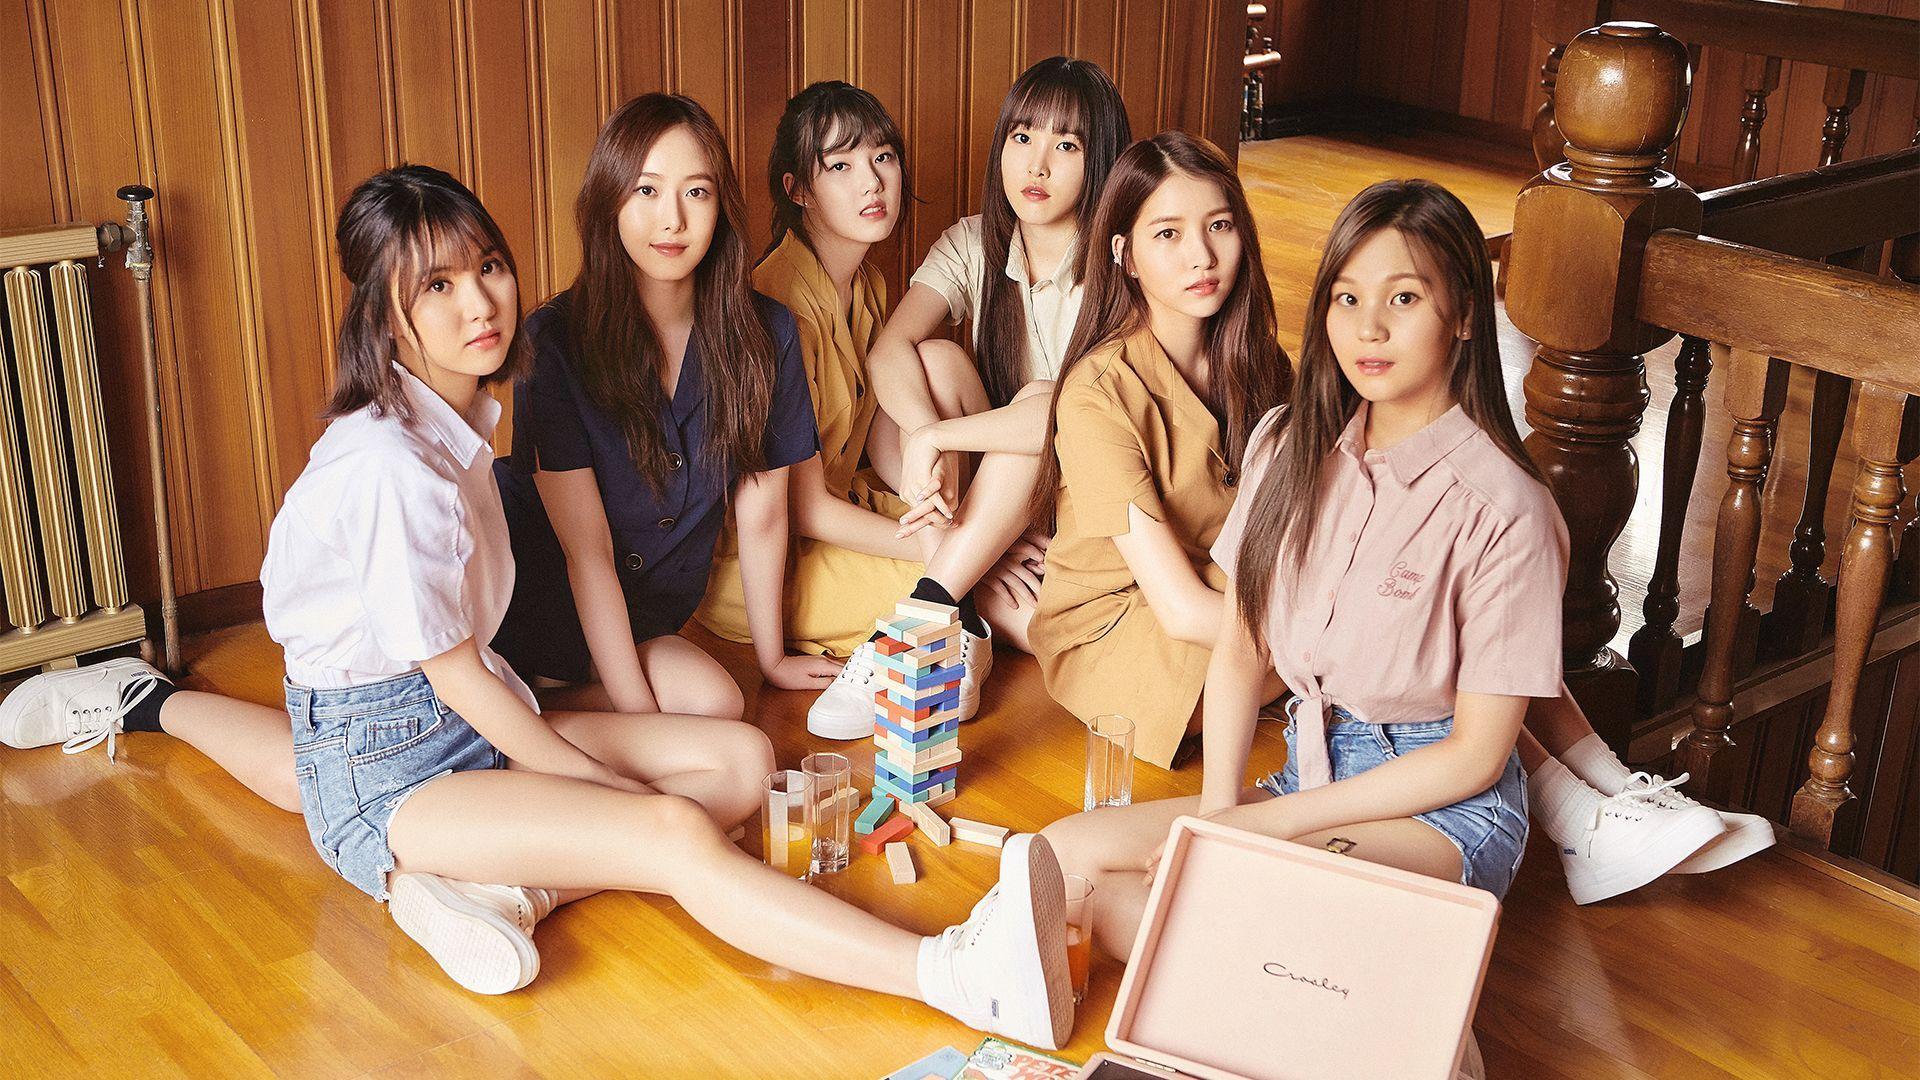 323309 GFriend, All Members, Labyrinth, Album, 4k - Rare Gallery HD  Wallpapers